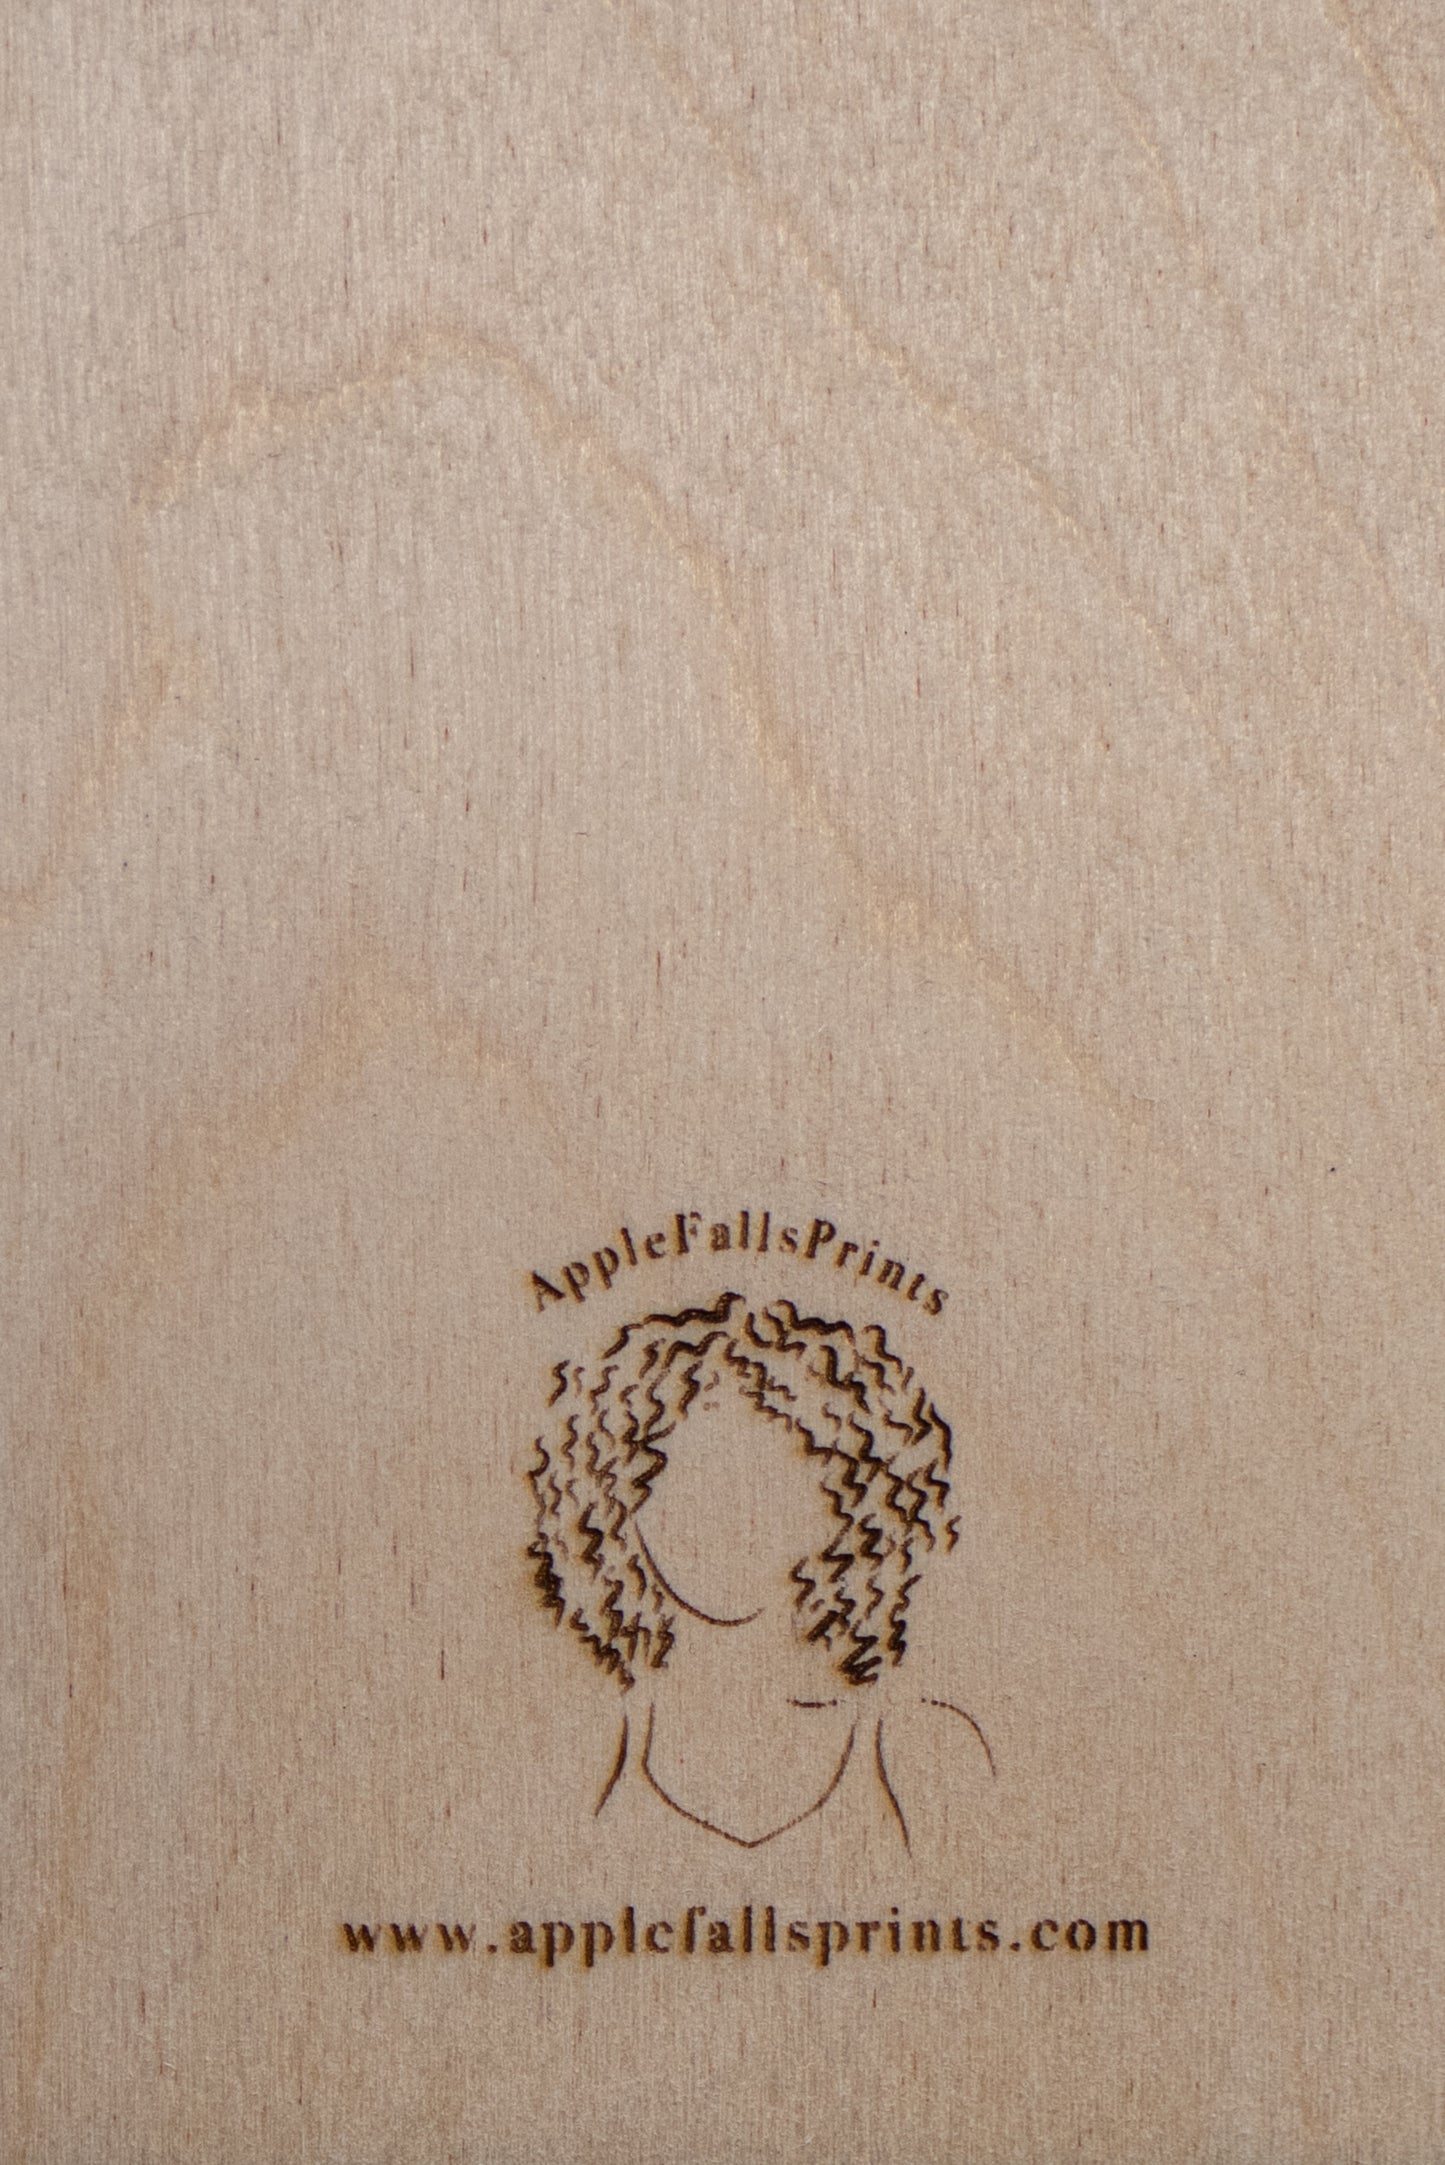 Woman with Mandala Afro and Tattoos | Wooden Laser Cut/Engraved Notebook | Made to Order